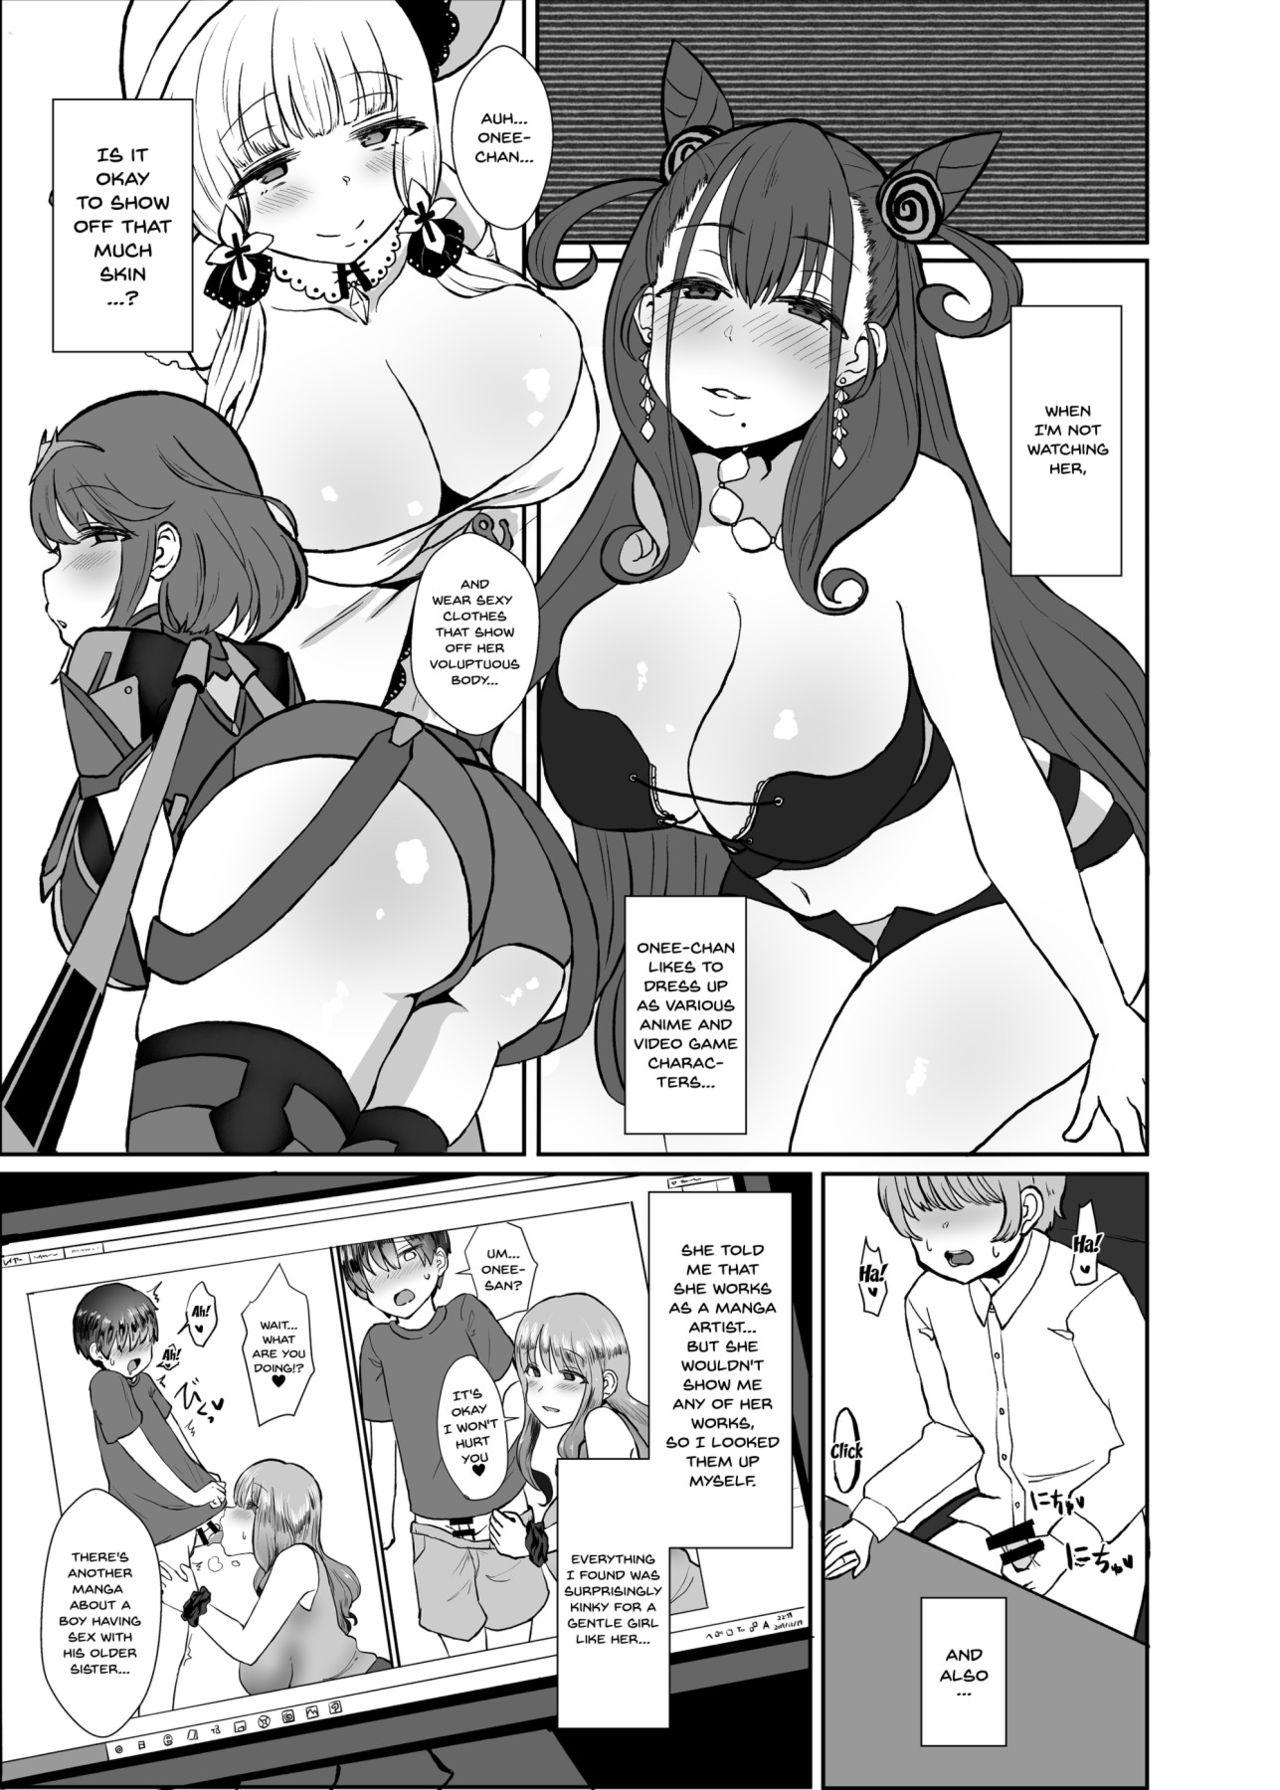 Black Cock [Mizore Nabe (Mizore)] Onee-chan no Heya | Onee-chans Room (Fate/Grand Order) [English] {Doujins.com} [Digital] - Fate grand order Amateur Sex - Page 4